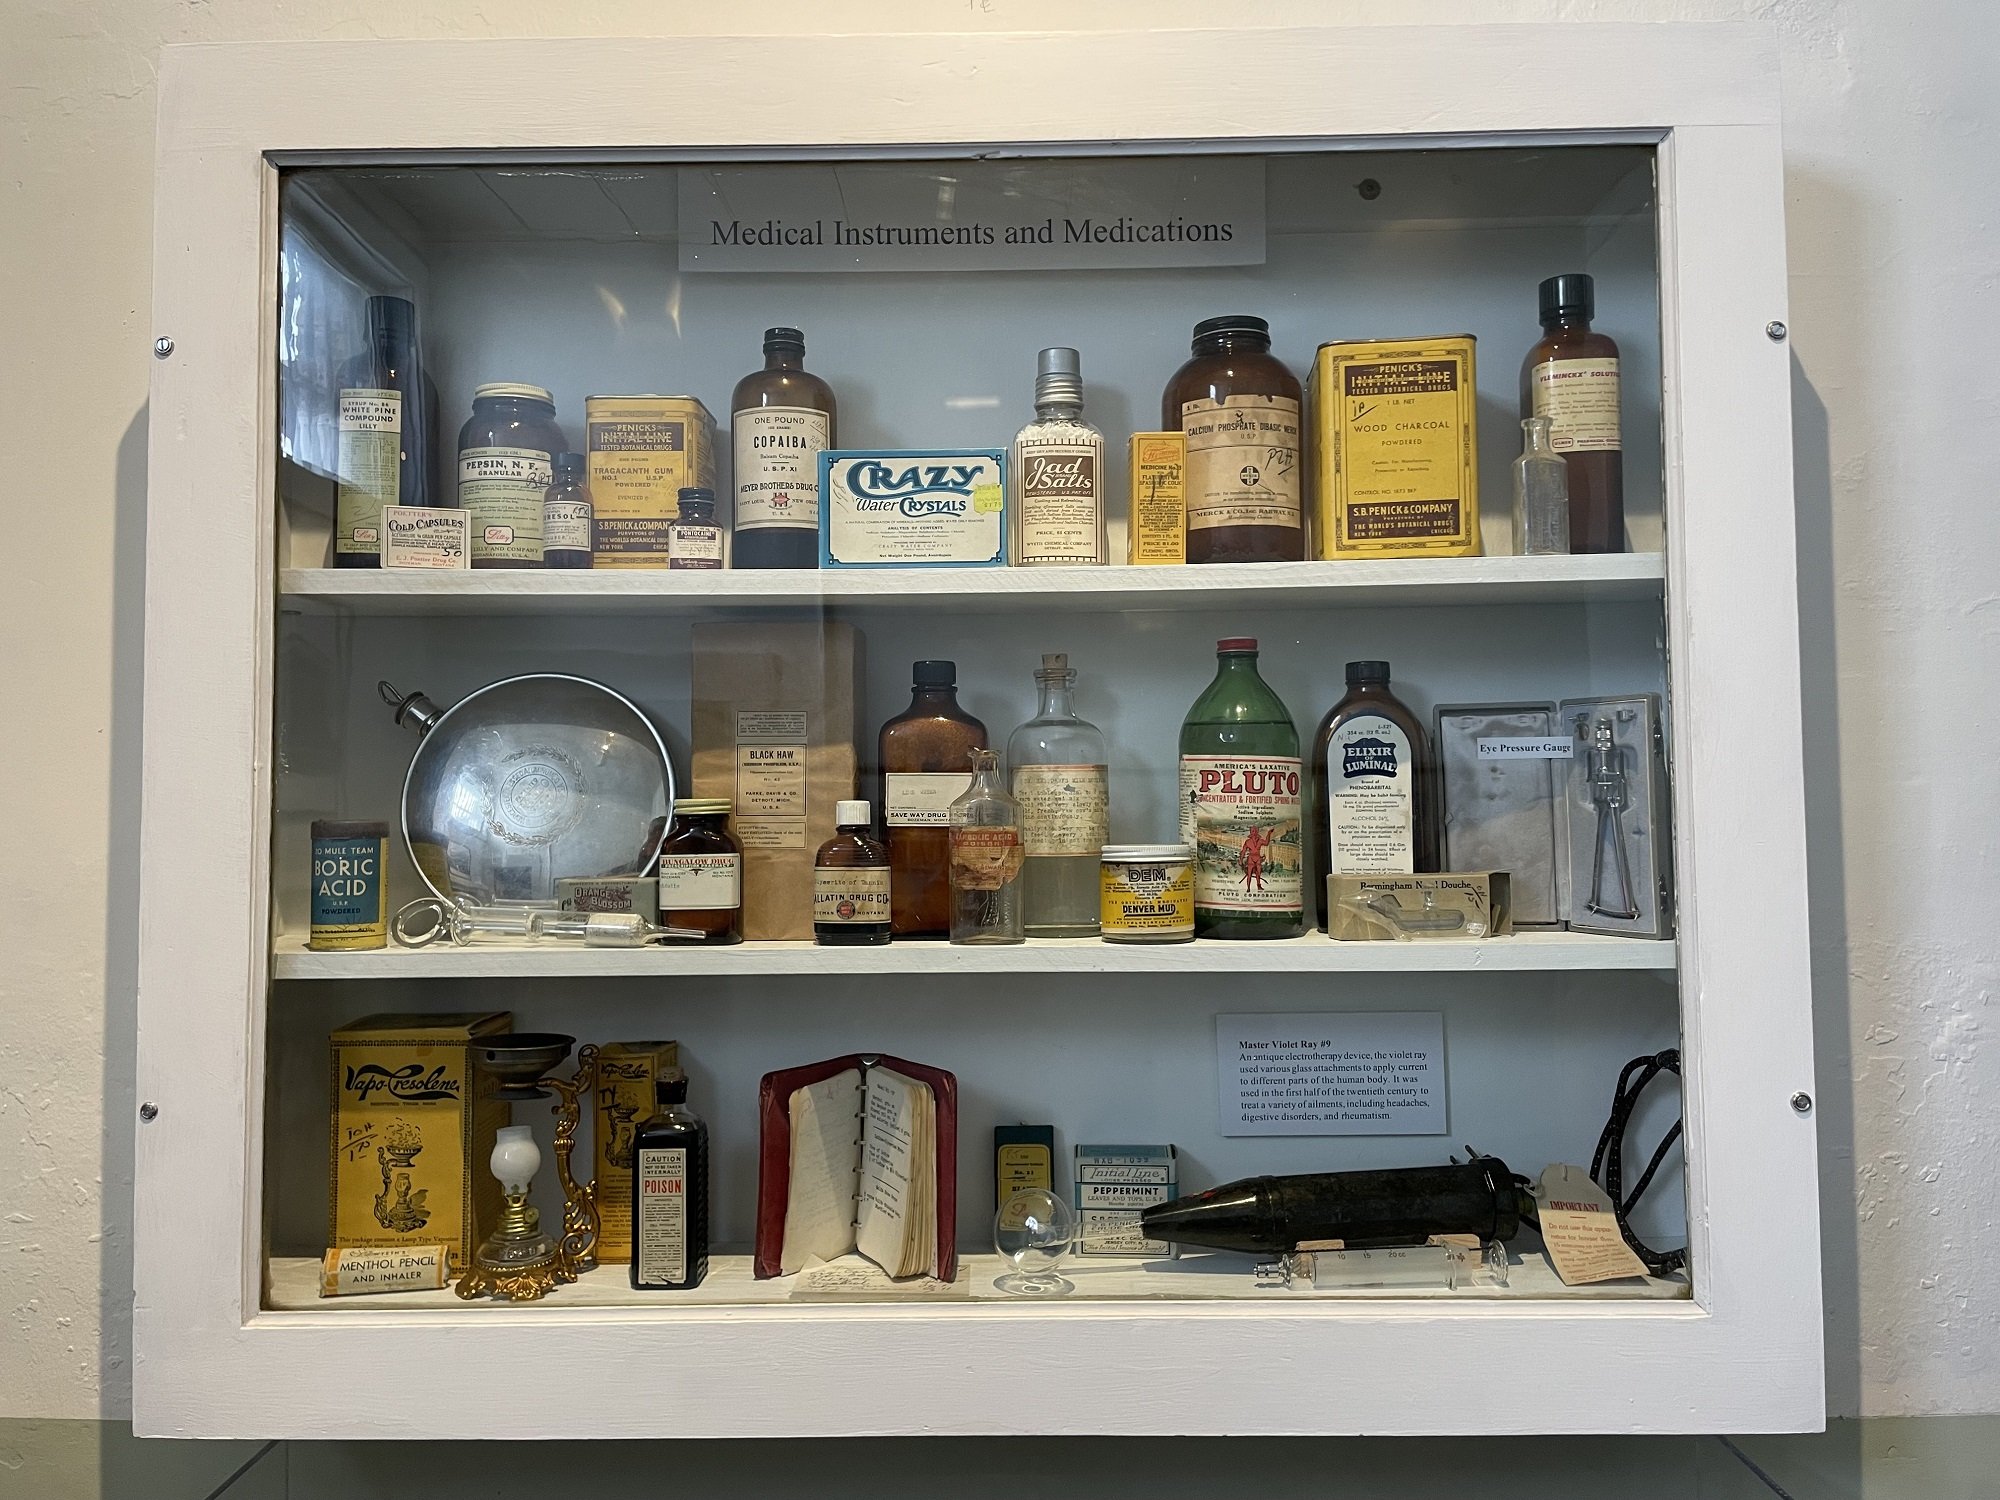 A History of Medicine in Gallatin County